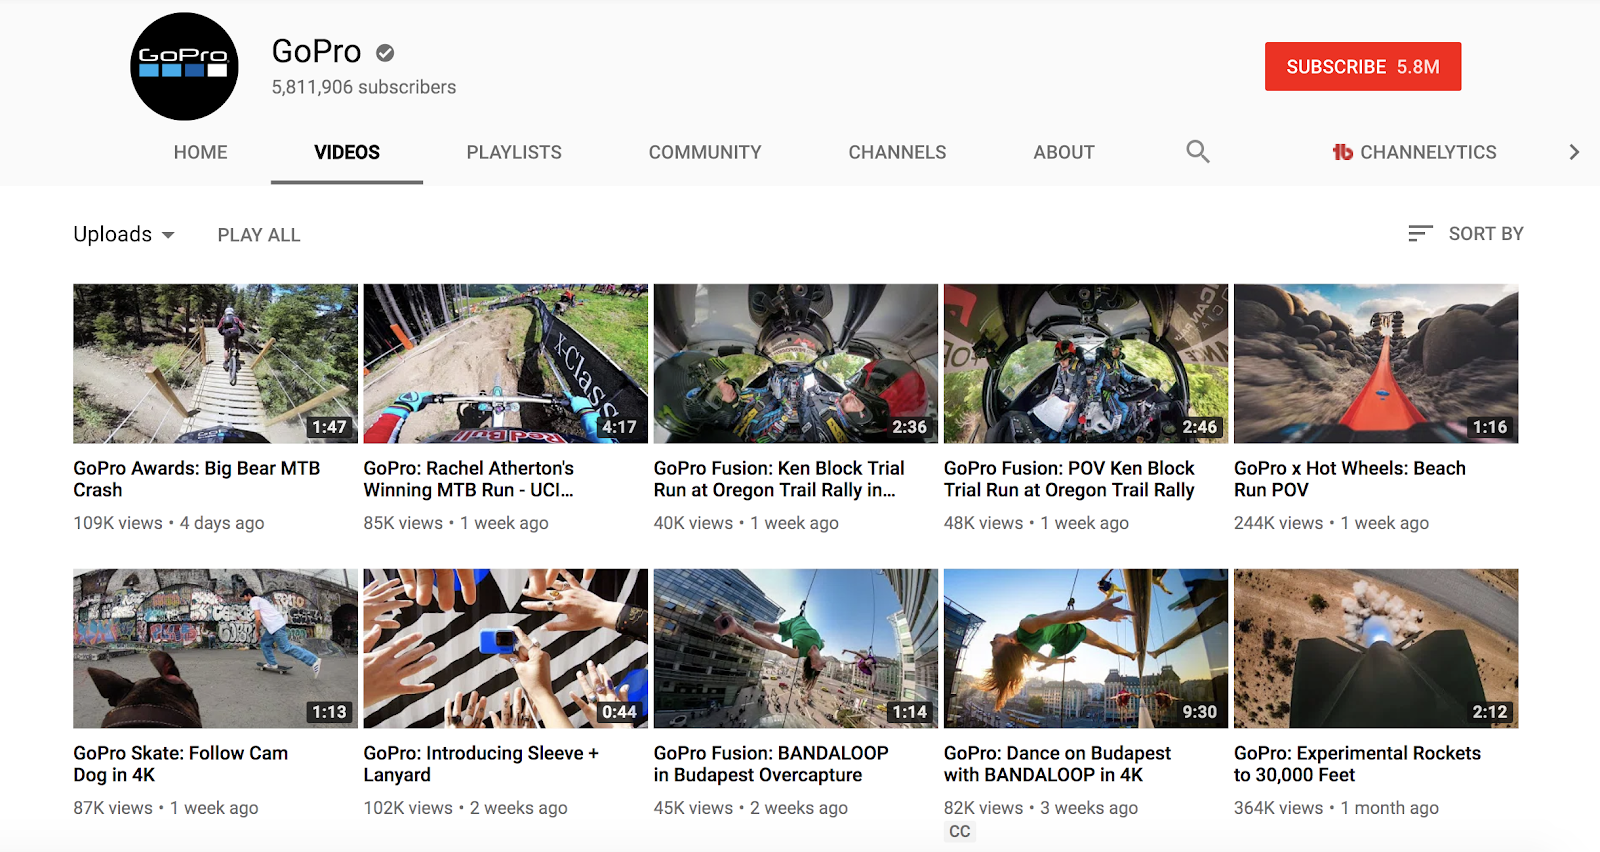 Youtube for business: Gopro is an example of a brand doing storytelling well on the platform